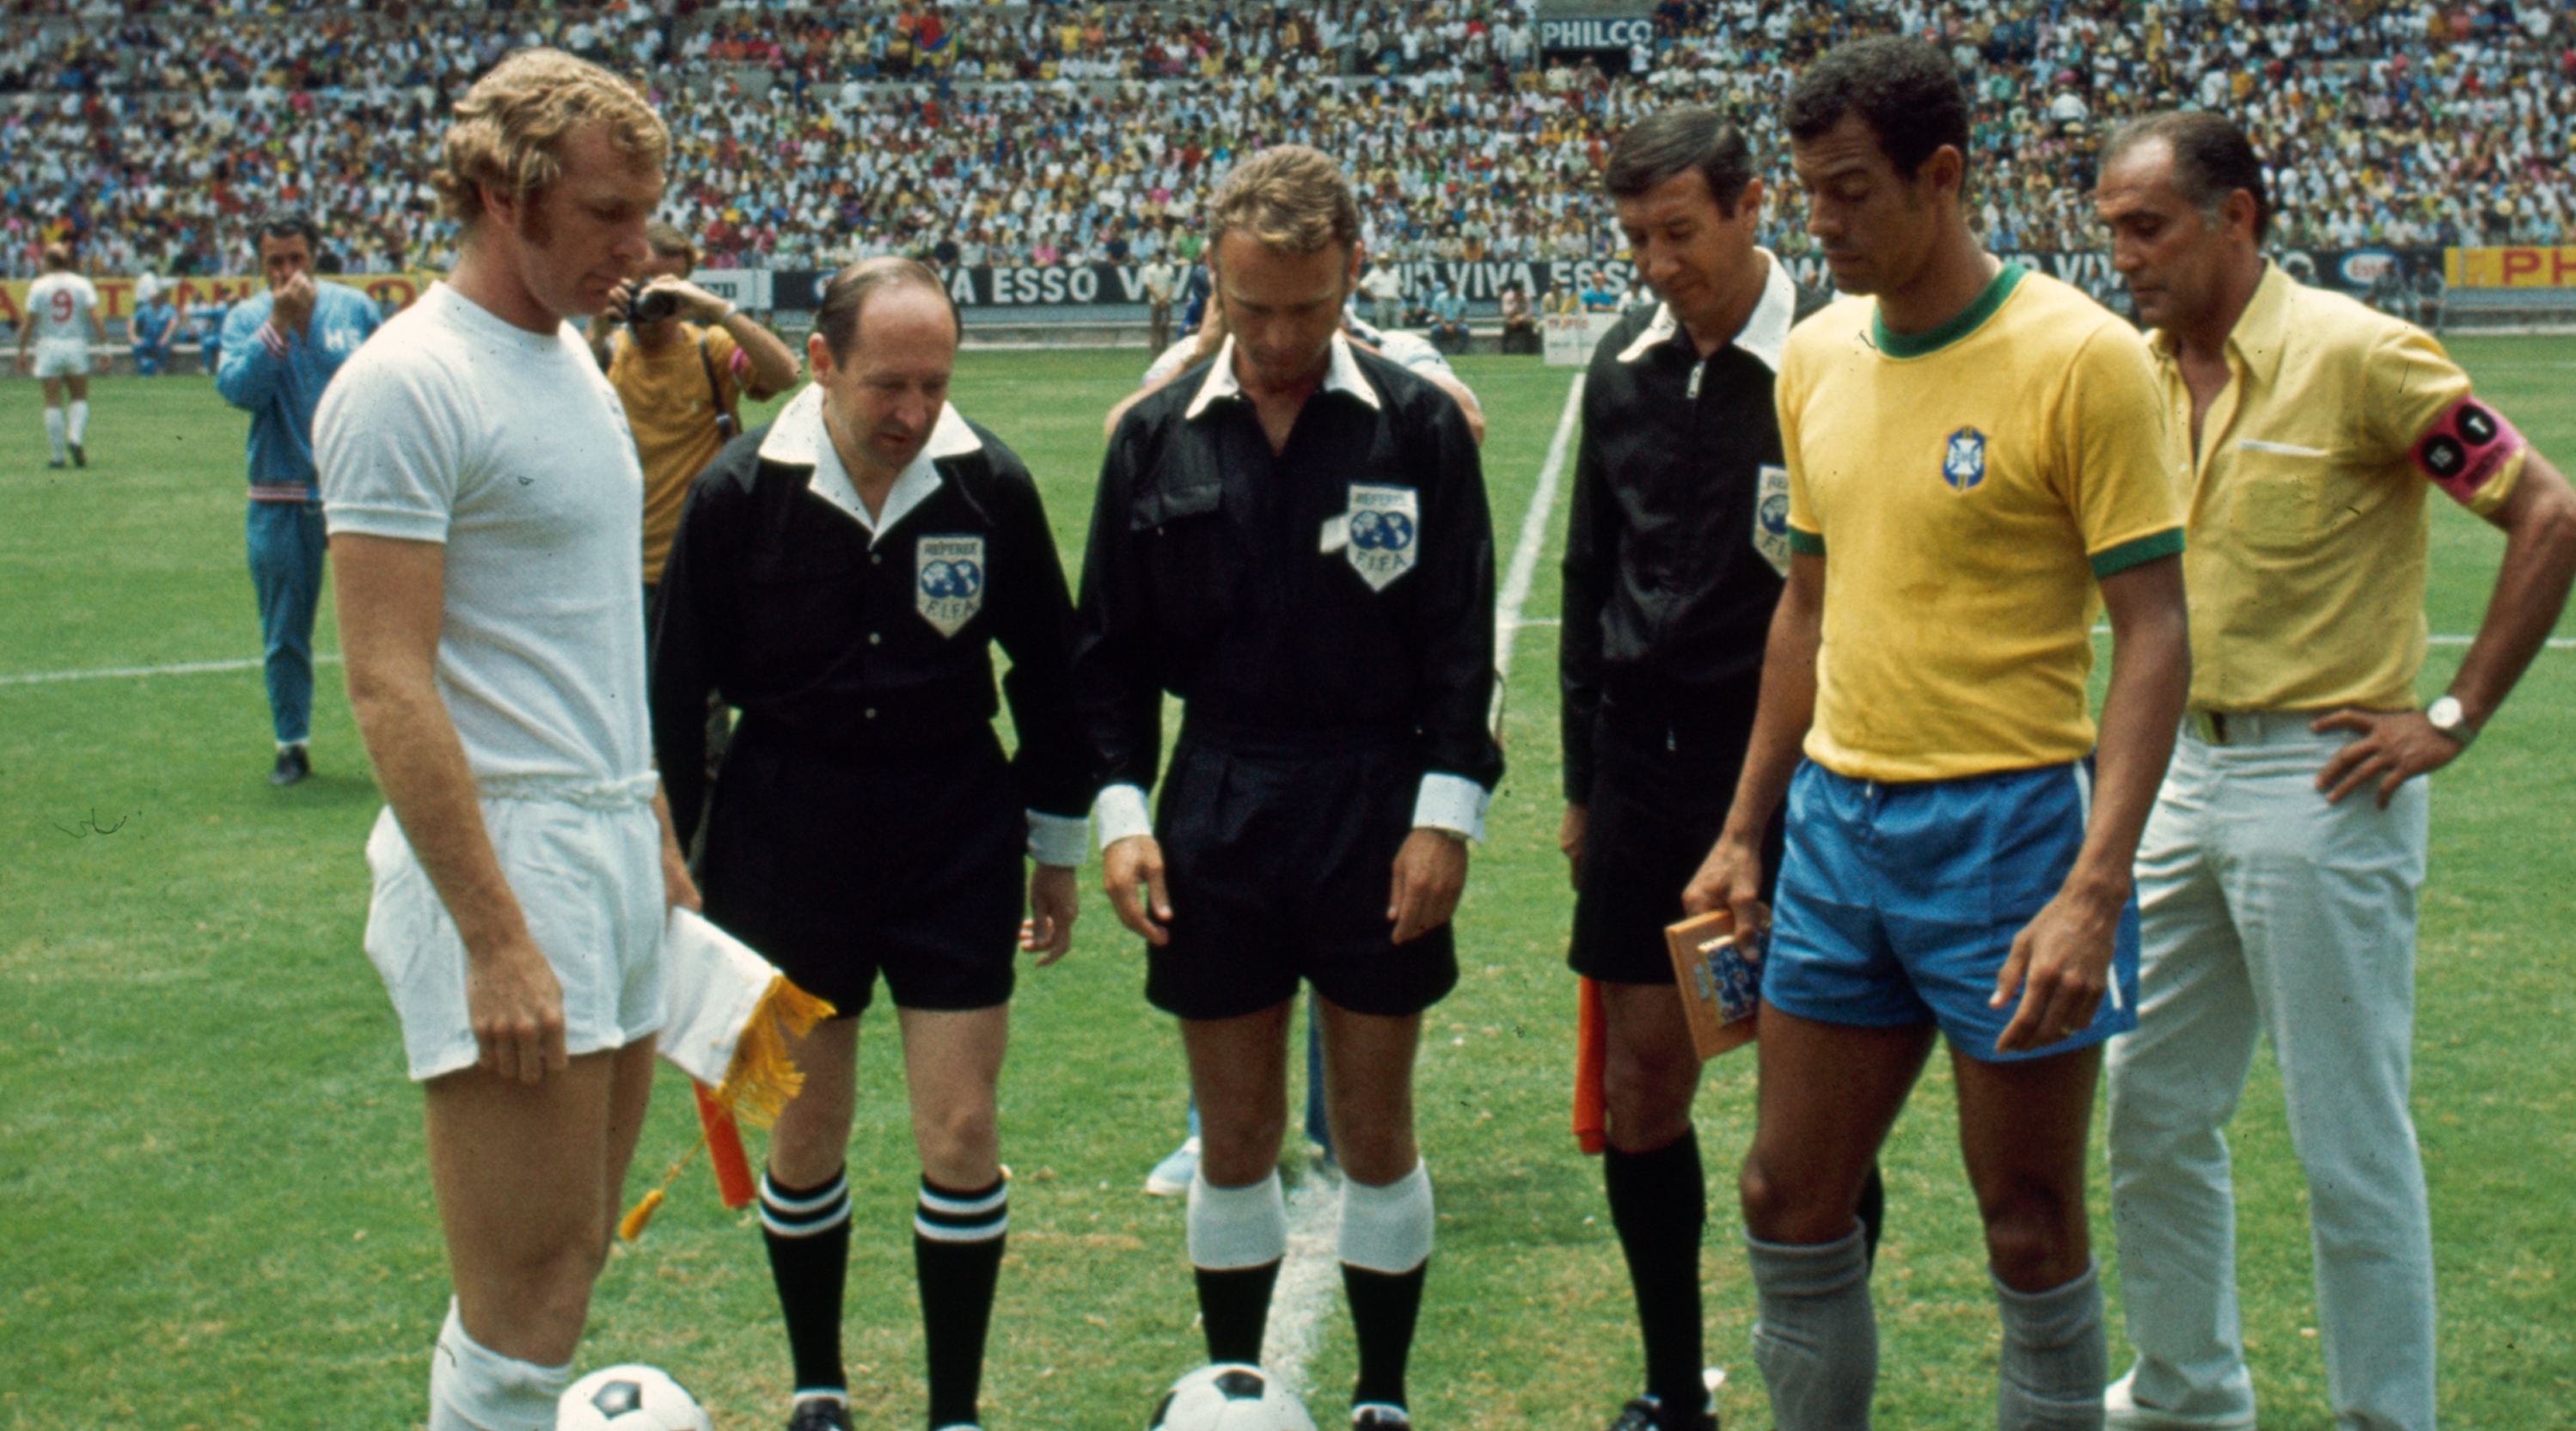 World Cup Group 3 match at Guadalajara, MexicoEngland 0 v Brazil 1The two captains, Bobby Moore of England and Carlos Alberto of Brazil, at the toss up before the kick offJune 1970 . (Photo by Mirrorpix via Getty Images)